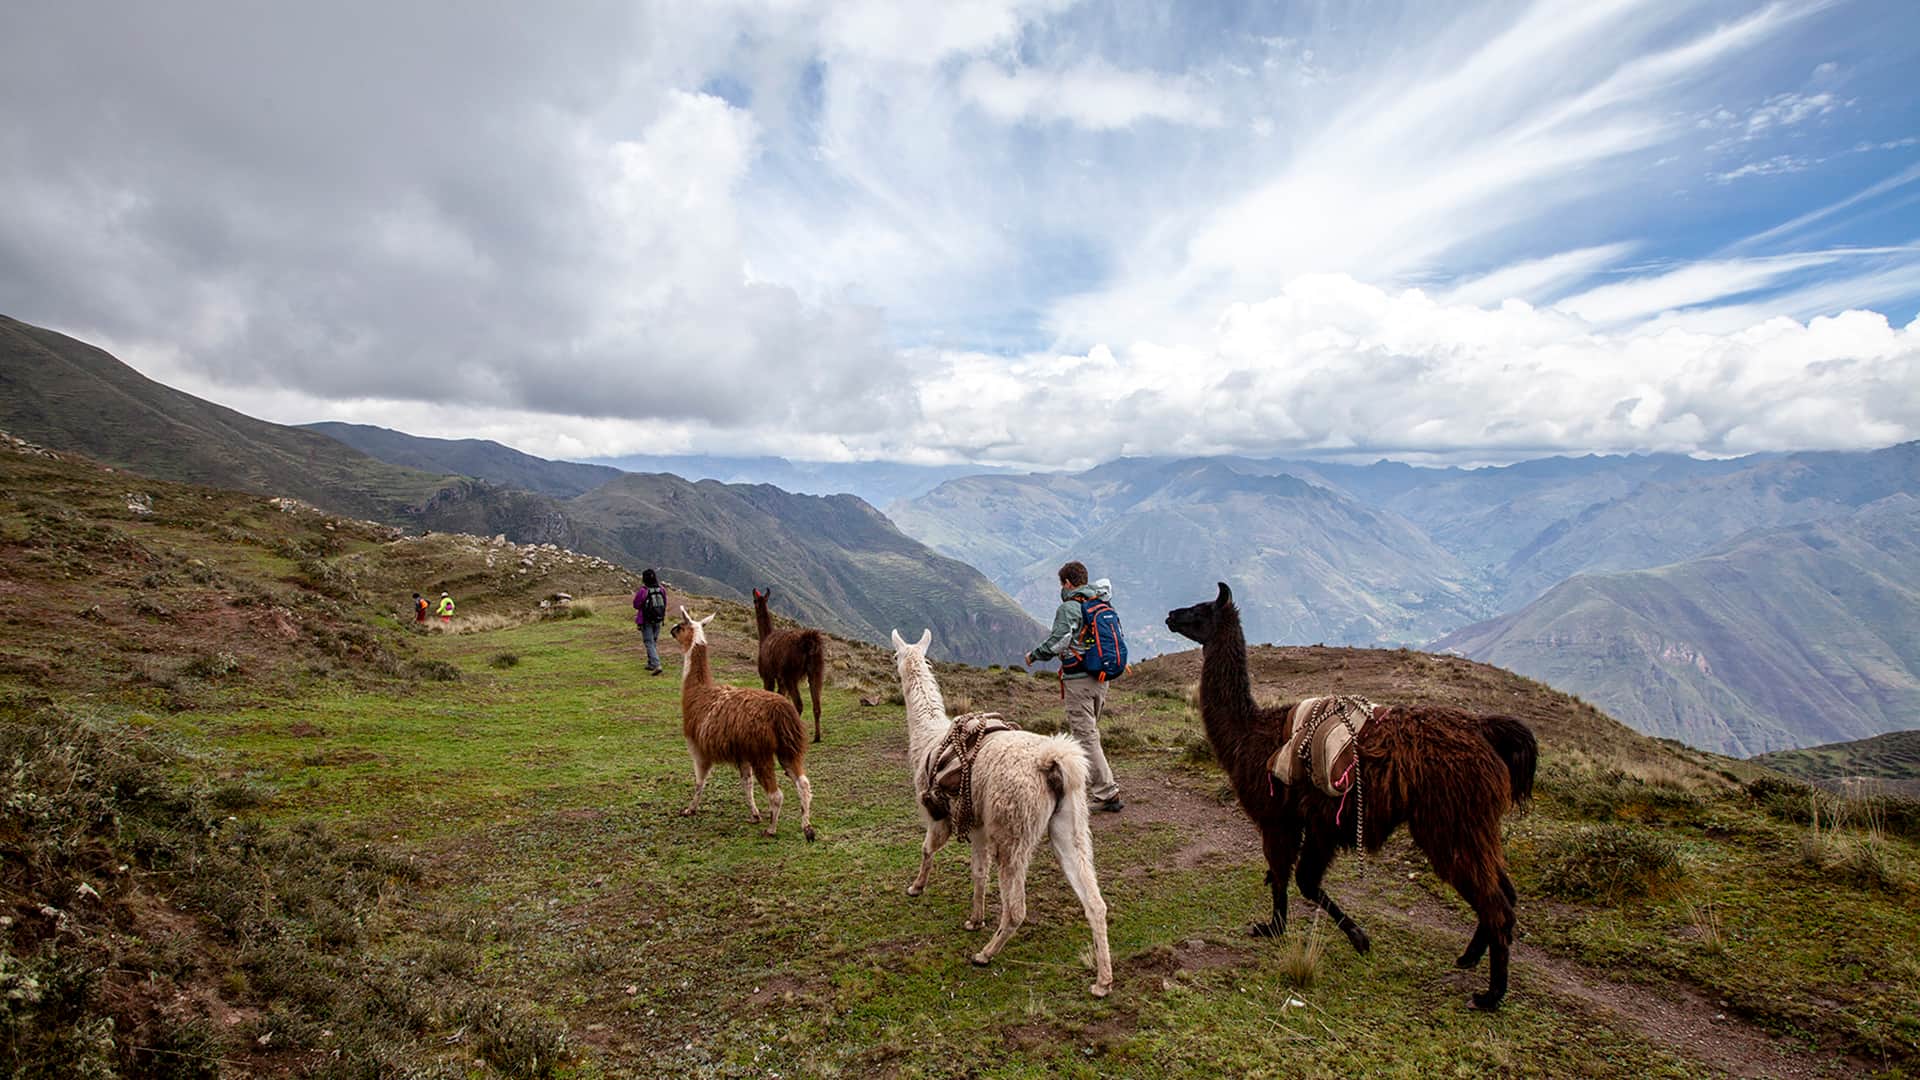 Four llamas and hikers in the highlands of the Sacred Valley of Cusco